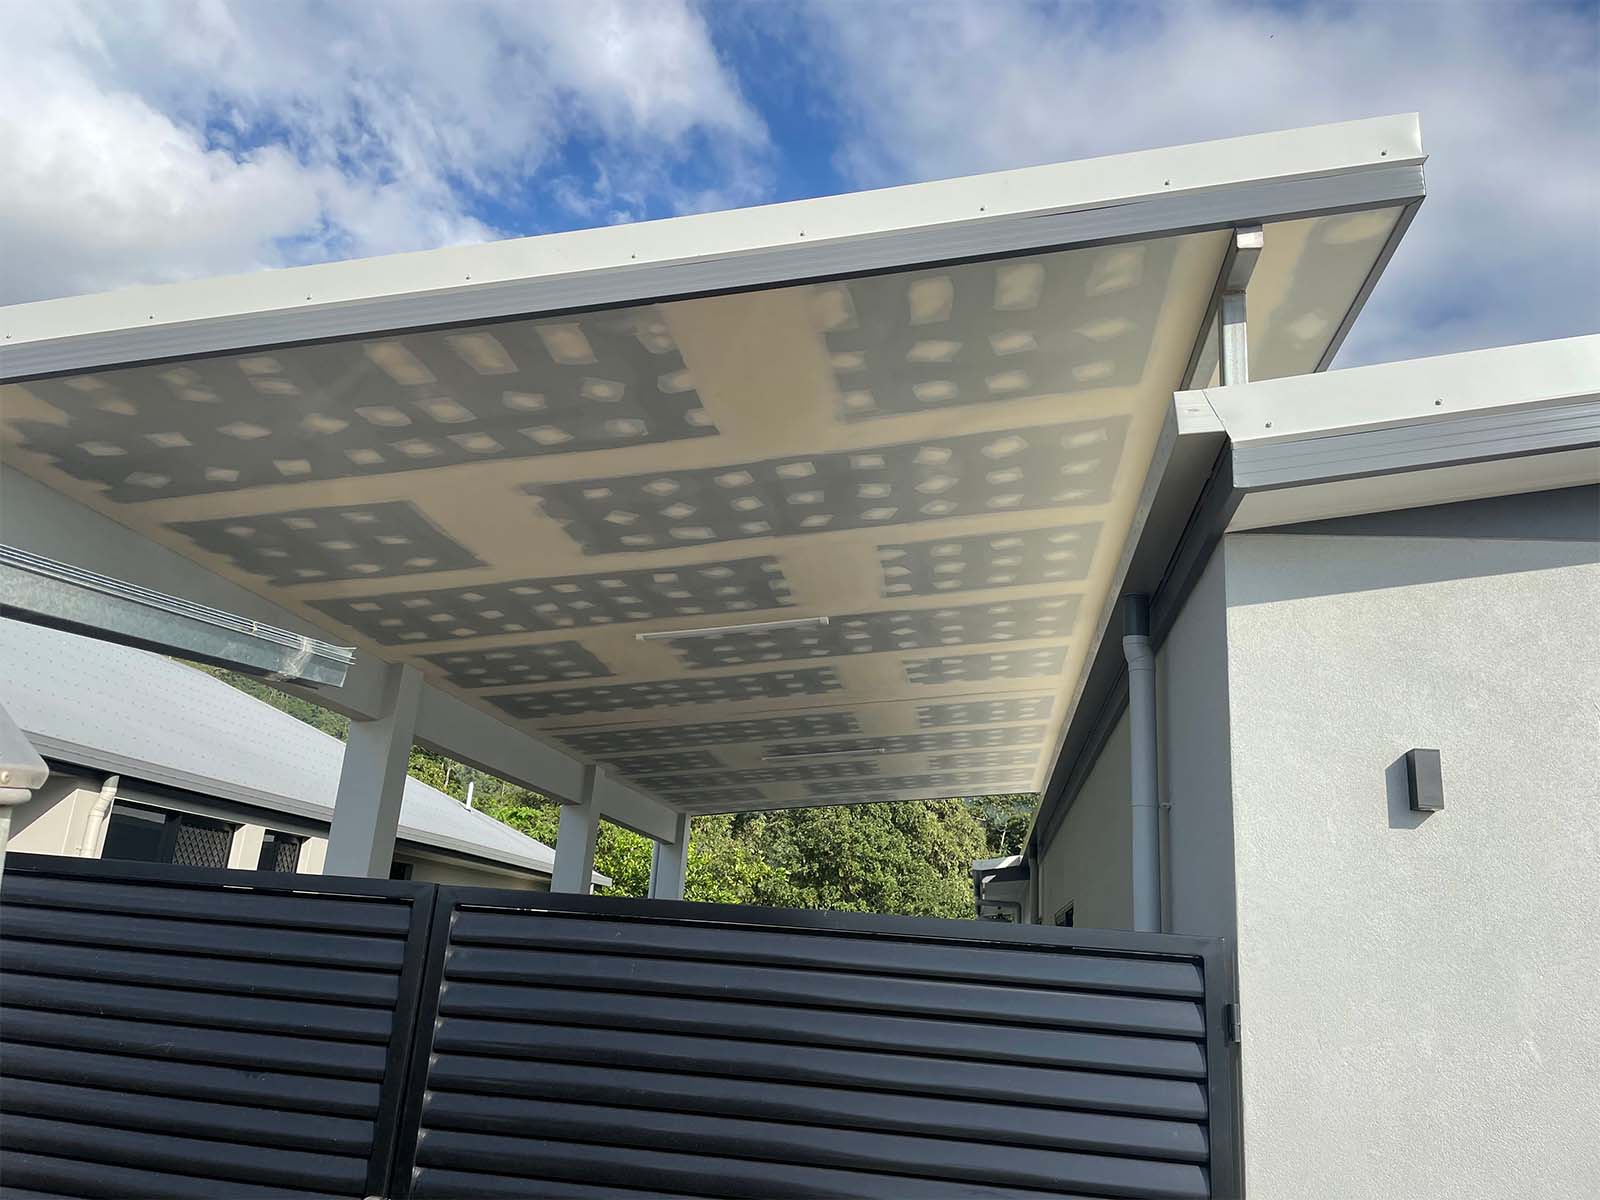 Ceiling Replacement In External Carport In Cairns